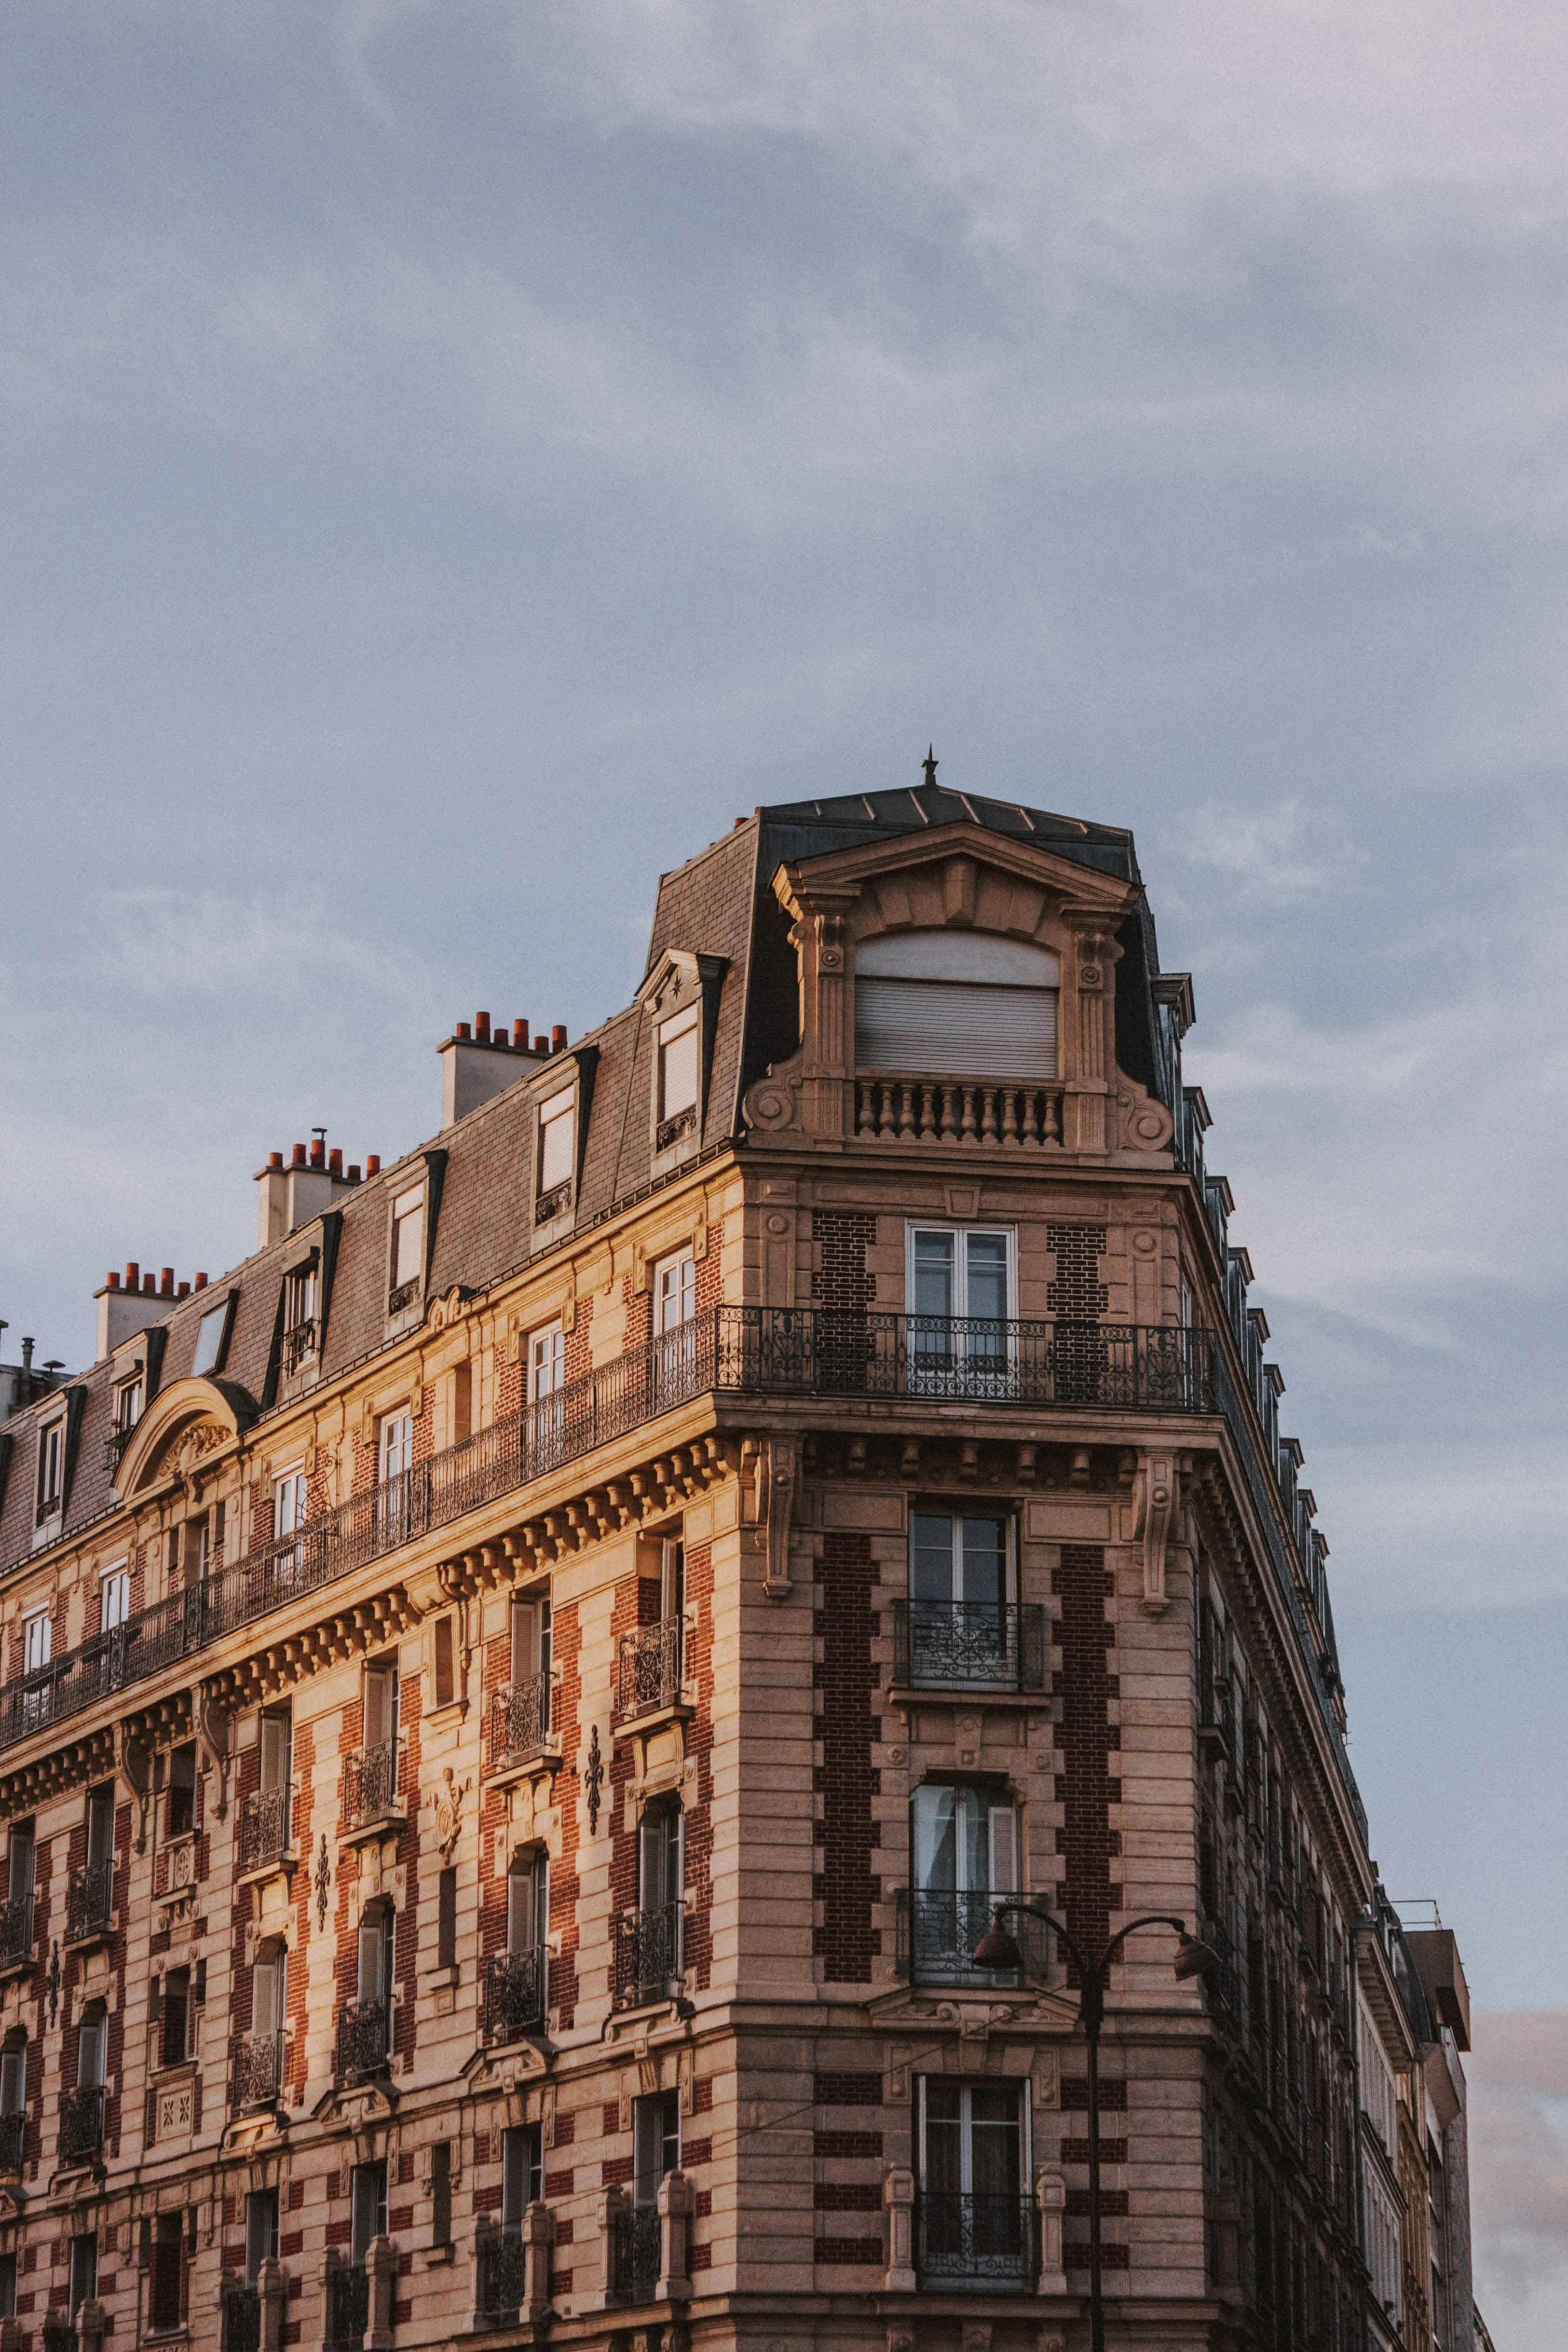 Bastille's architecture and artisans self-guided walking tour